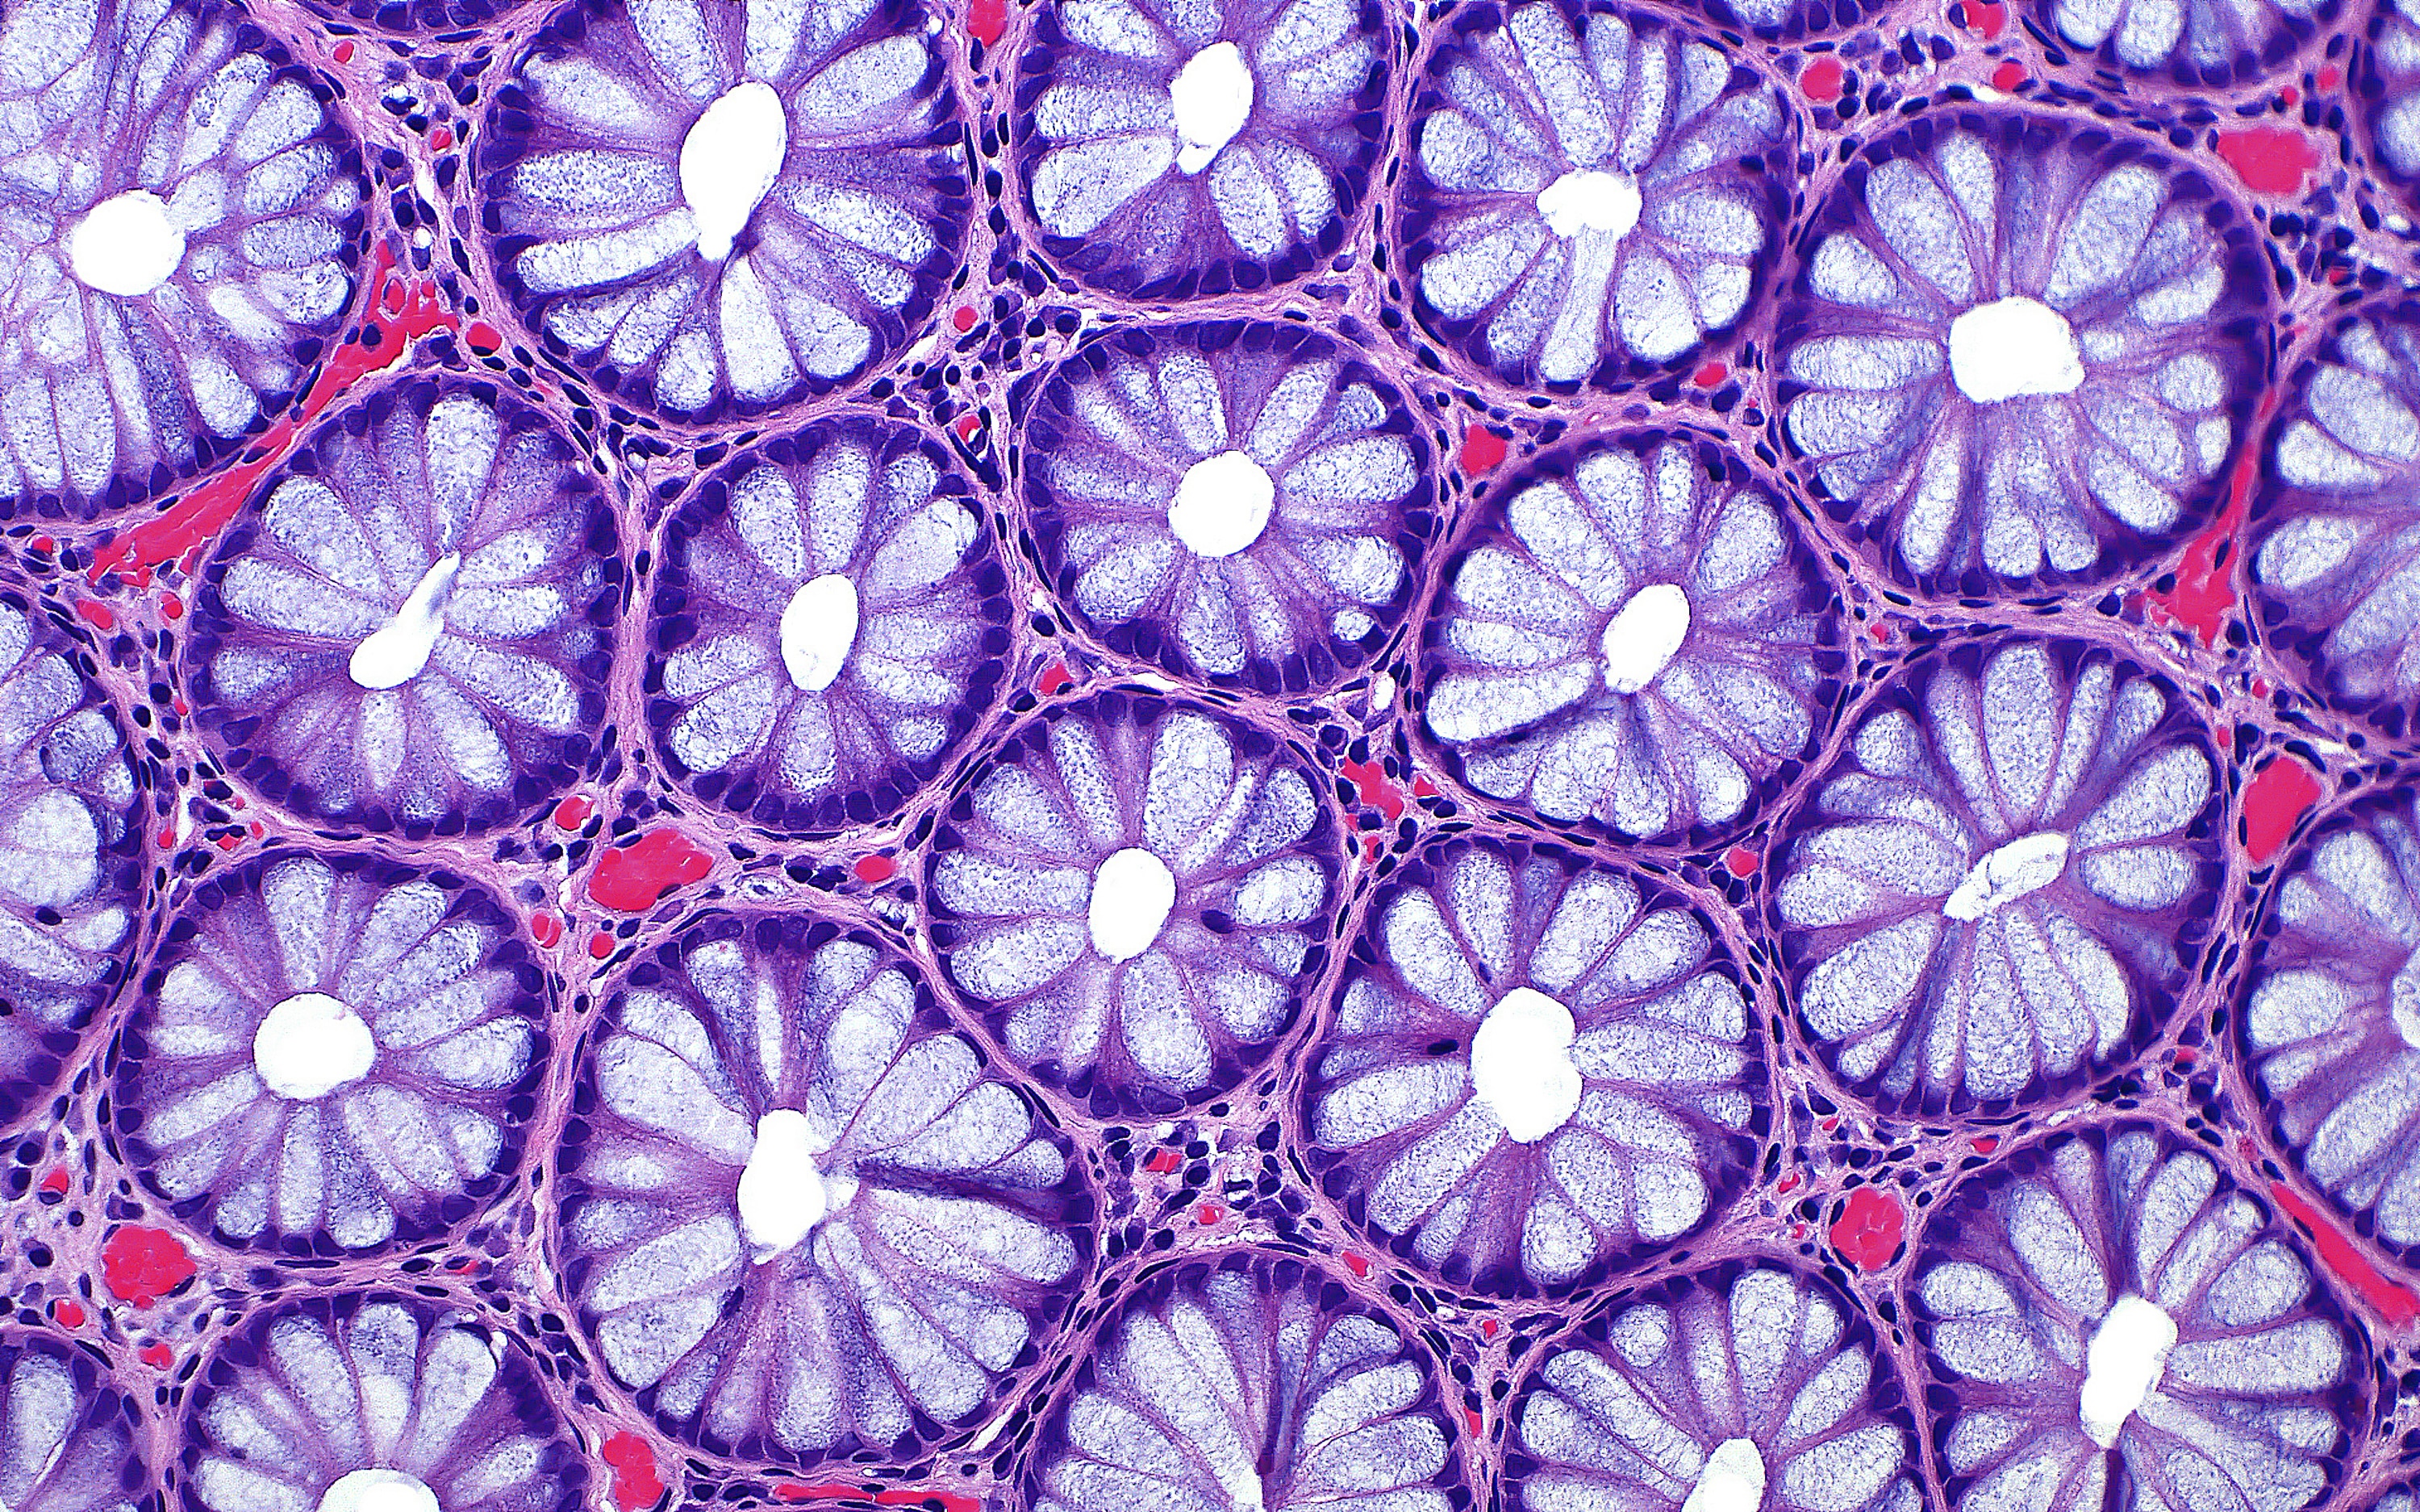 an extremely close-up picture taken with 20x magnification on a human colon, shown as purple and blue-coloured flower shapes